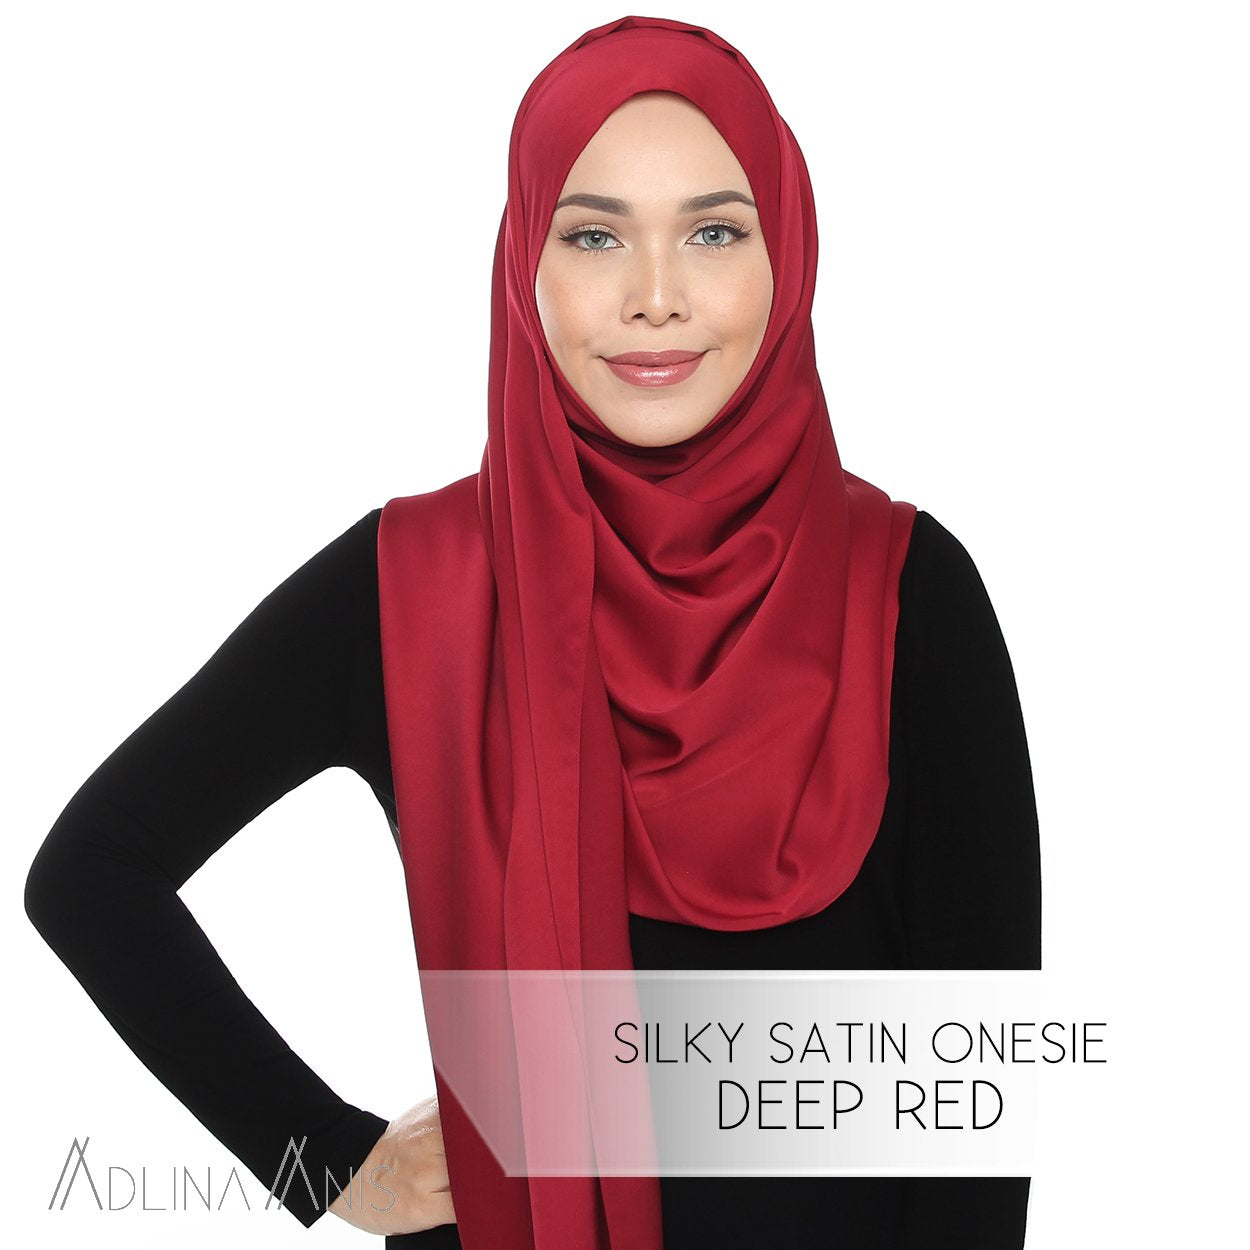 Silky Satin Onesie - Deep Red - Instant Hijabs - Adlina Anis - Third Culture Boutique